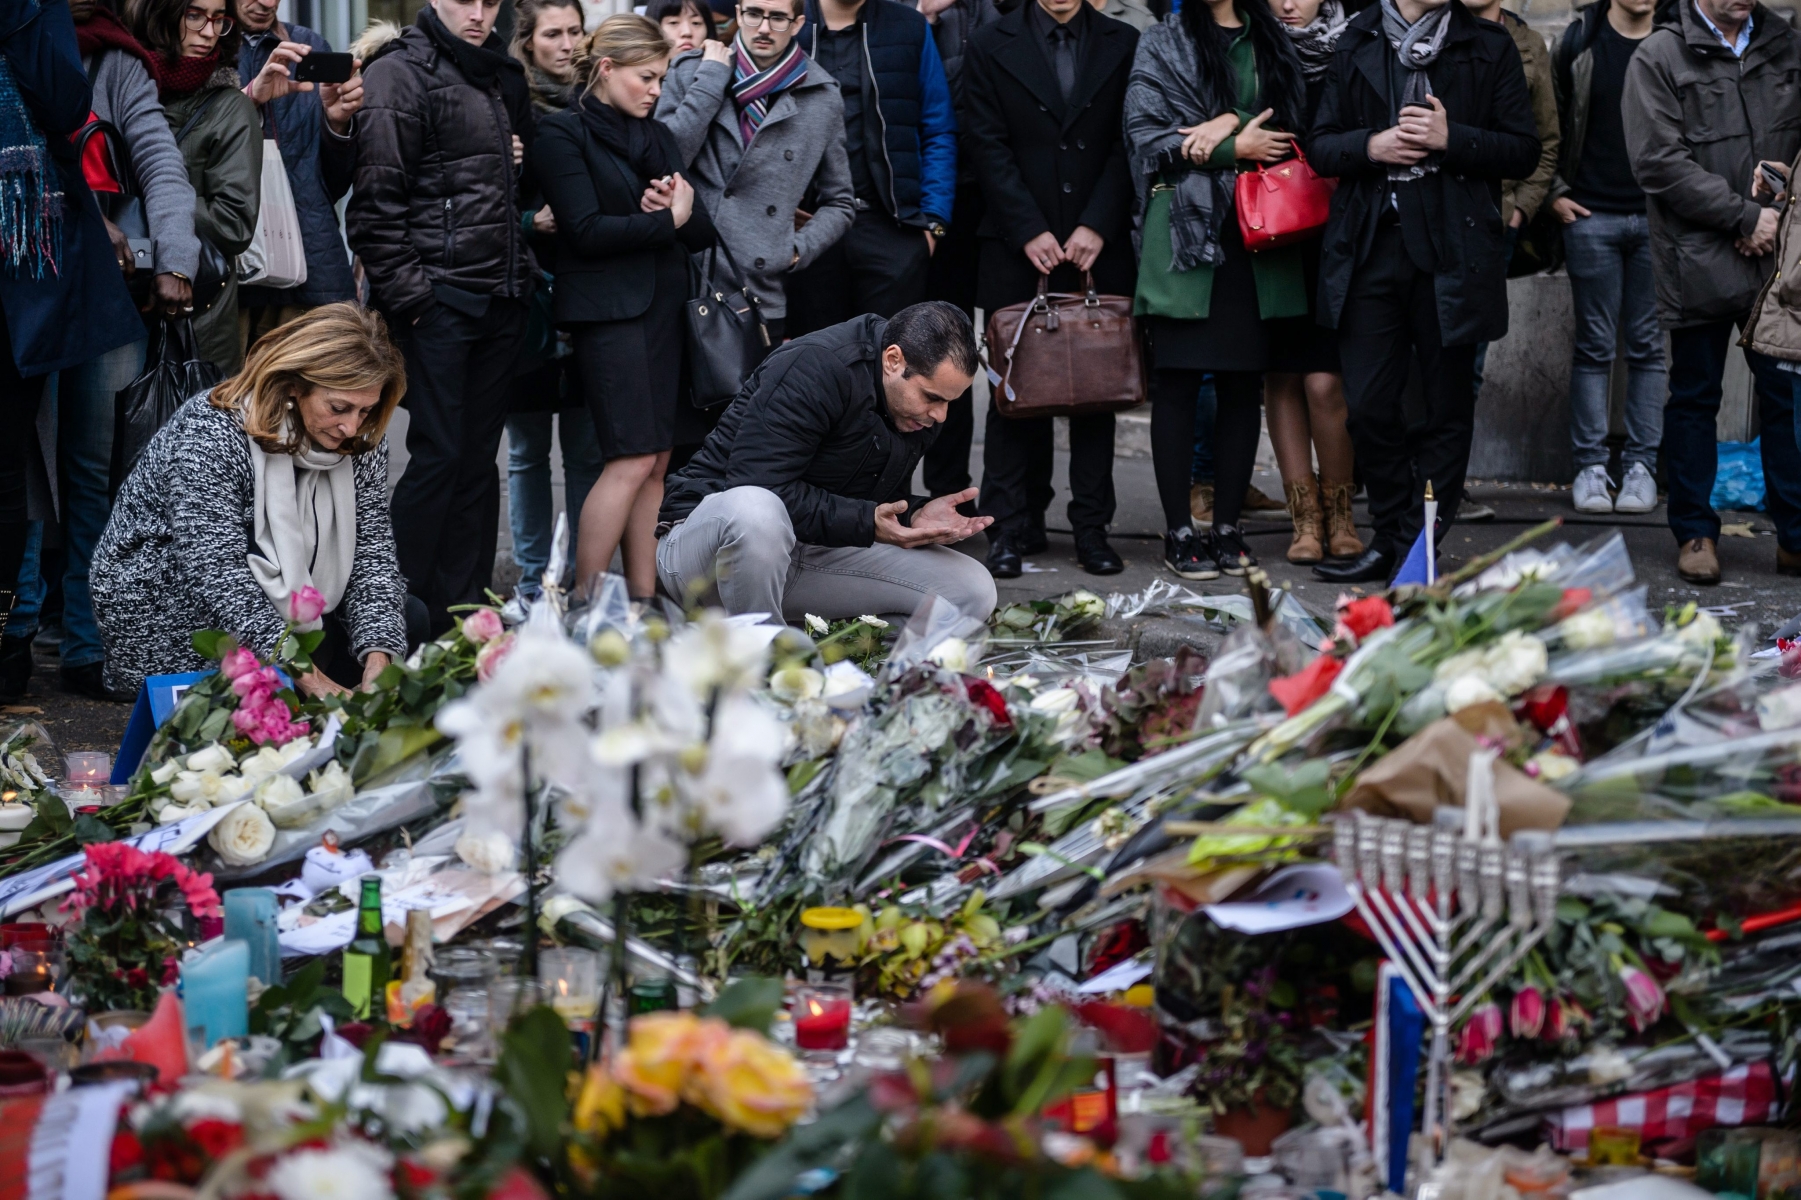 epa05028438 A muslim man is praying while people lay flowers and candles in front of the memorial set near the Bataclan concert venue in Paris, France, 16 November 2015. More than 130 people were killed and hundreds injured in the terror attacks which targeted the Bataclan concert hall, the Stade de France national sports stadium, and several restaurants and bars in the French capital on 13 November. Authorities believe that three coordinated teams of terrorists armed with rifles and explosive vests carried out the attacks, which the Islamic State (IS) extremist group has claimed responsibility for.  EPA/CHRISTOPHE PETIT TESSON FRANCE  PARIS ATTACKS AFTERMATH